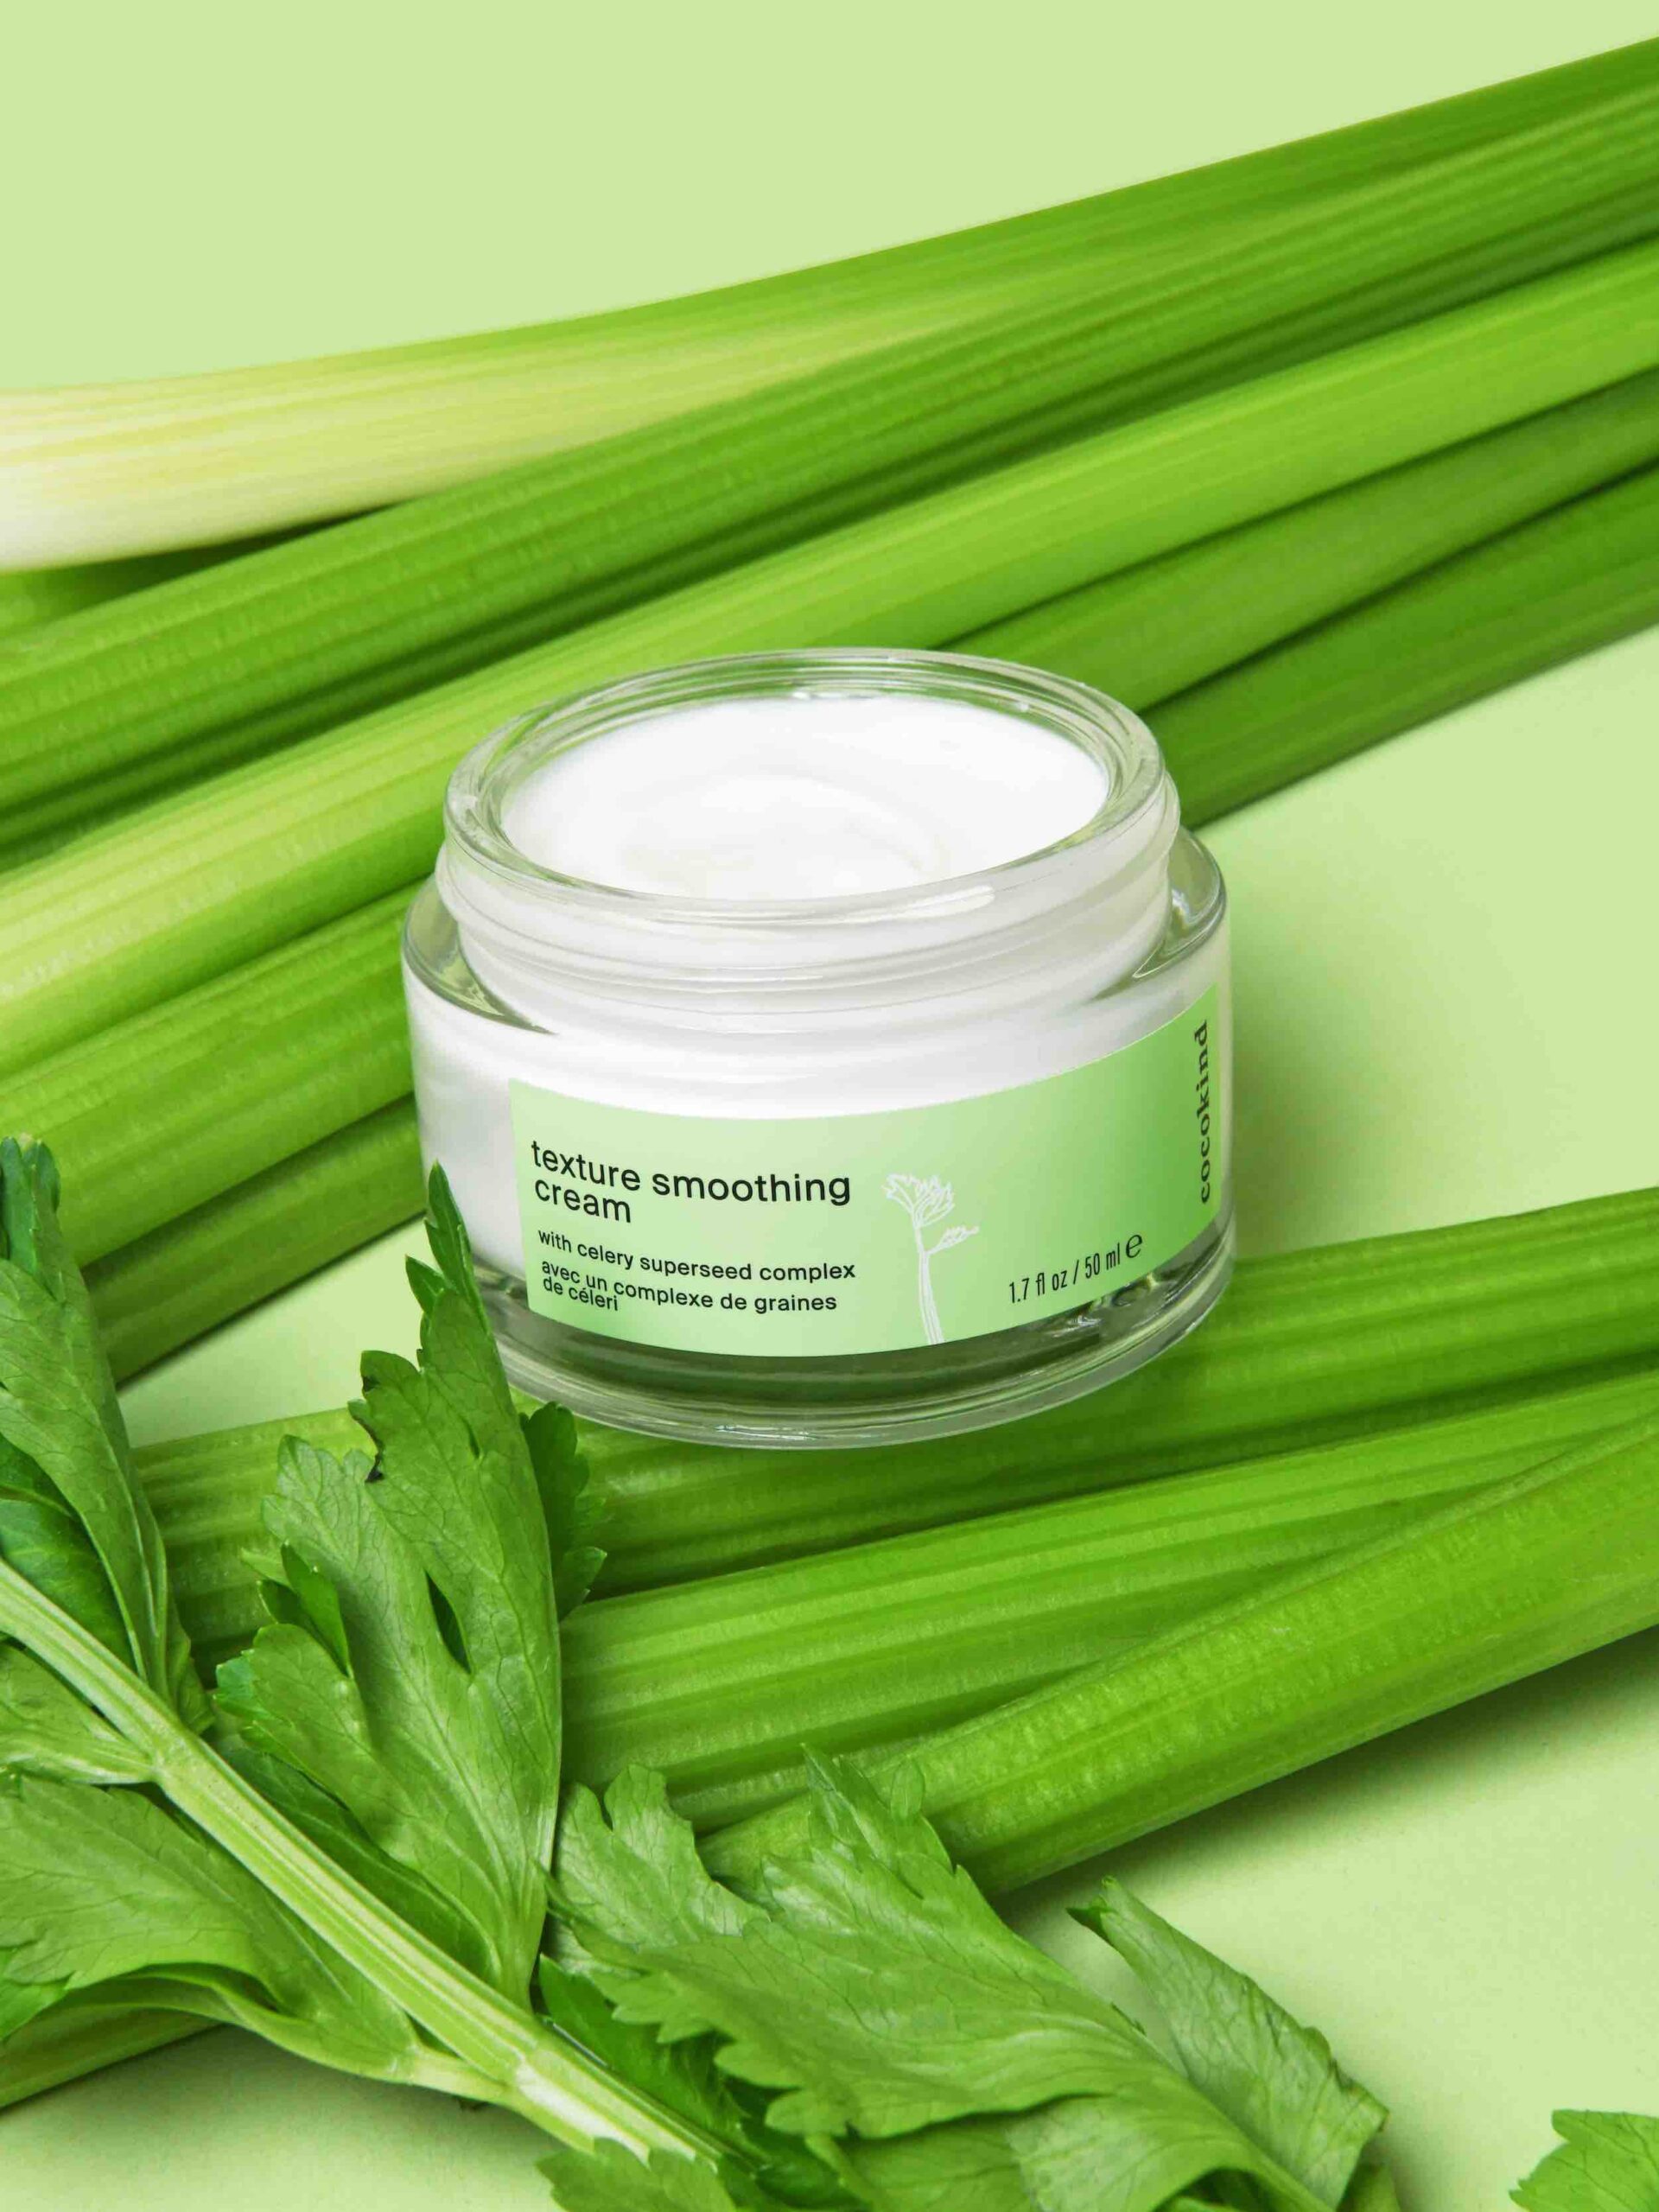 An open glass jar of cocokind's texture smoothing cream with celery in the background.